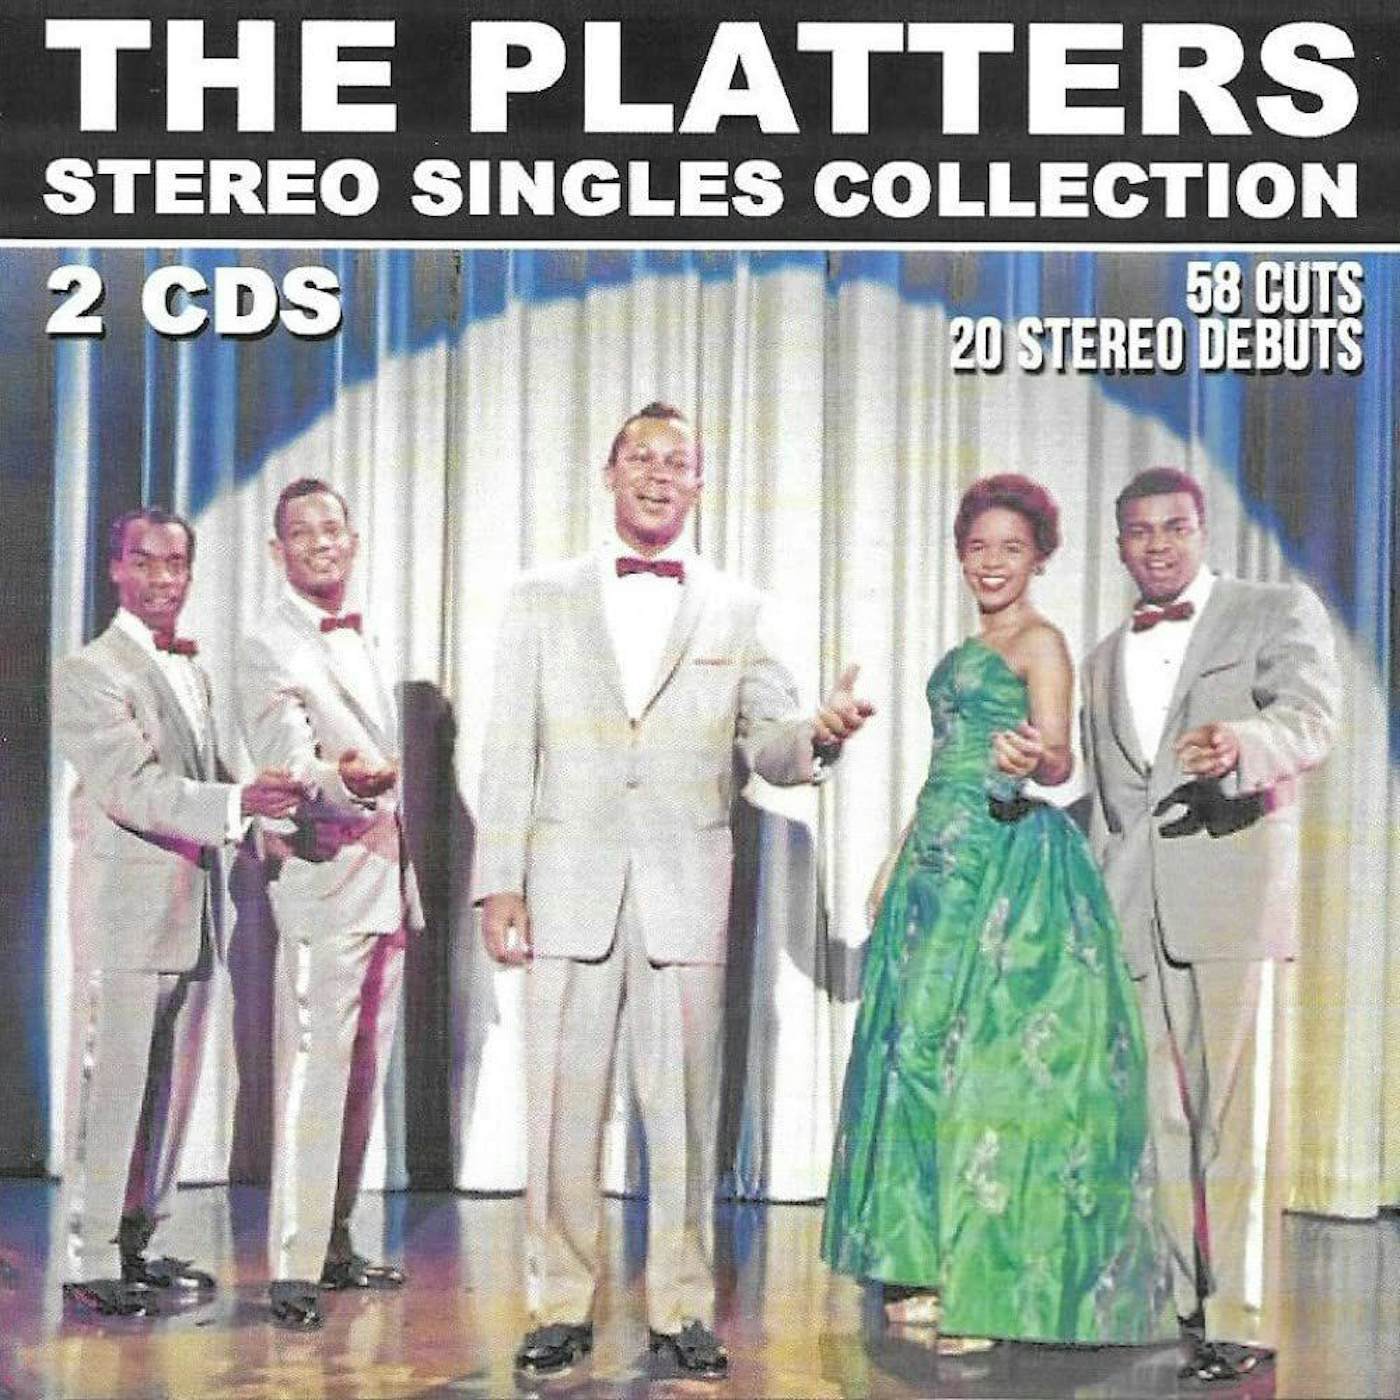 The Platters Stereo Singles Collection CD